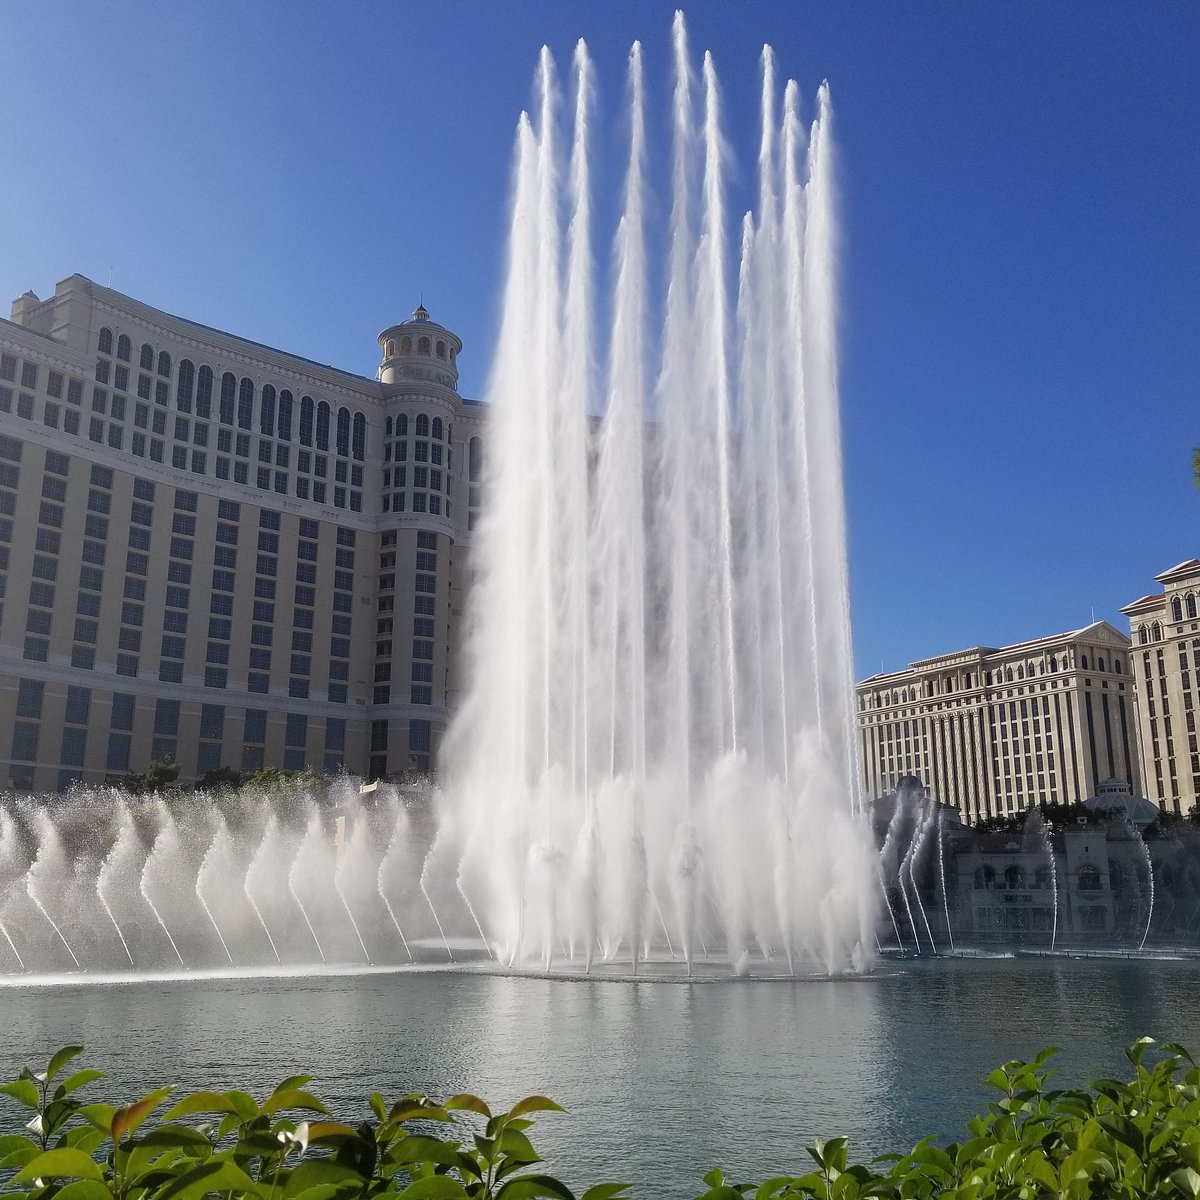 20 things to know about Bellagio Las Vegas as it turns 20